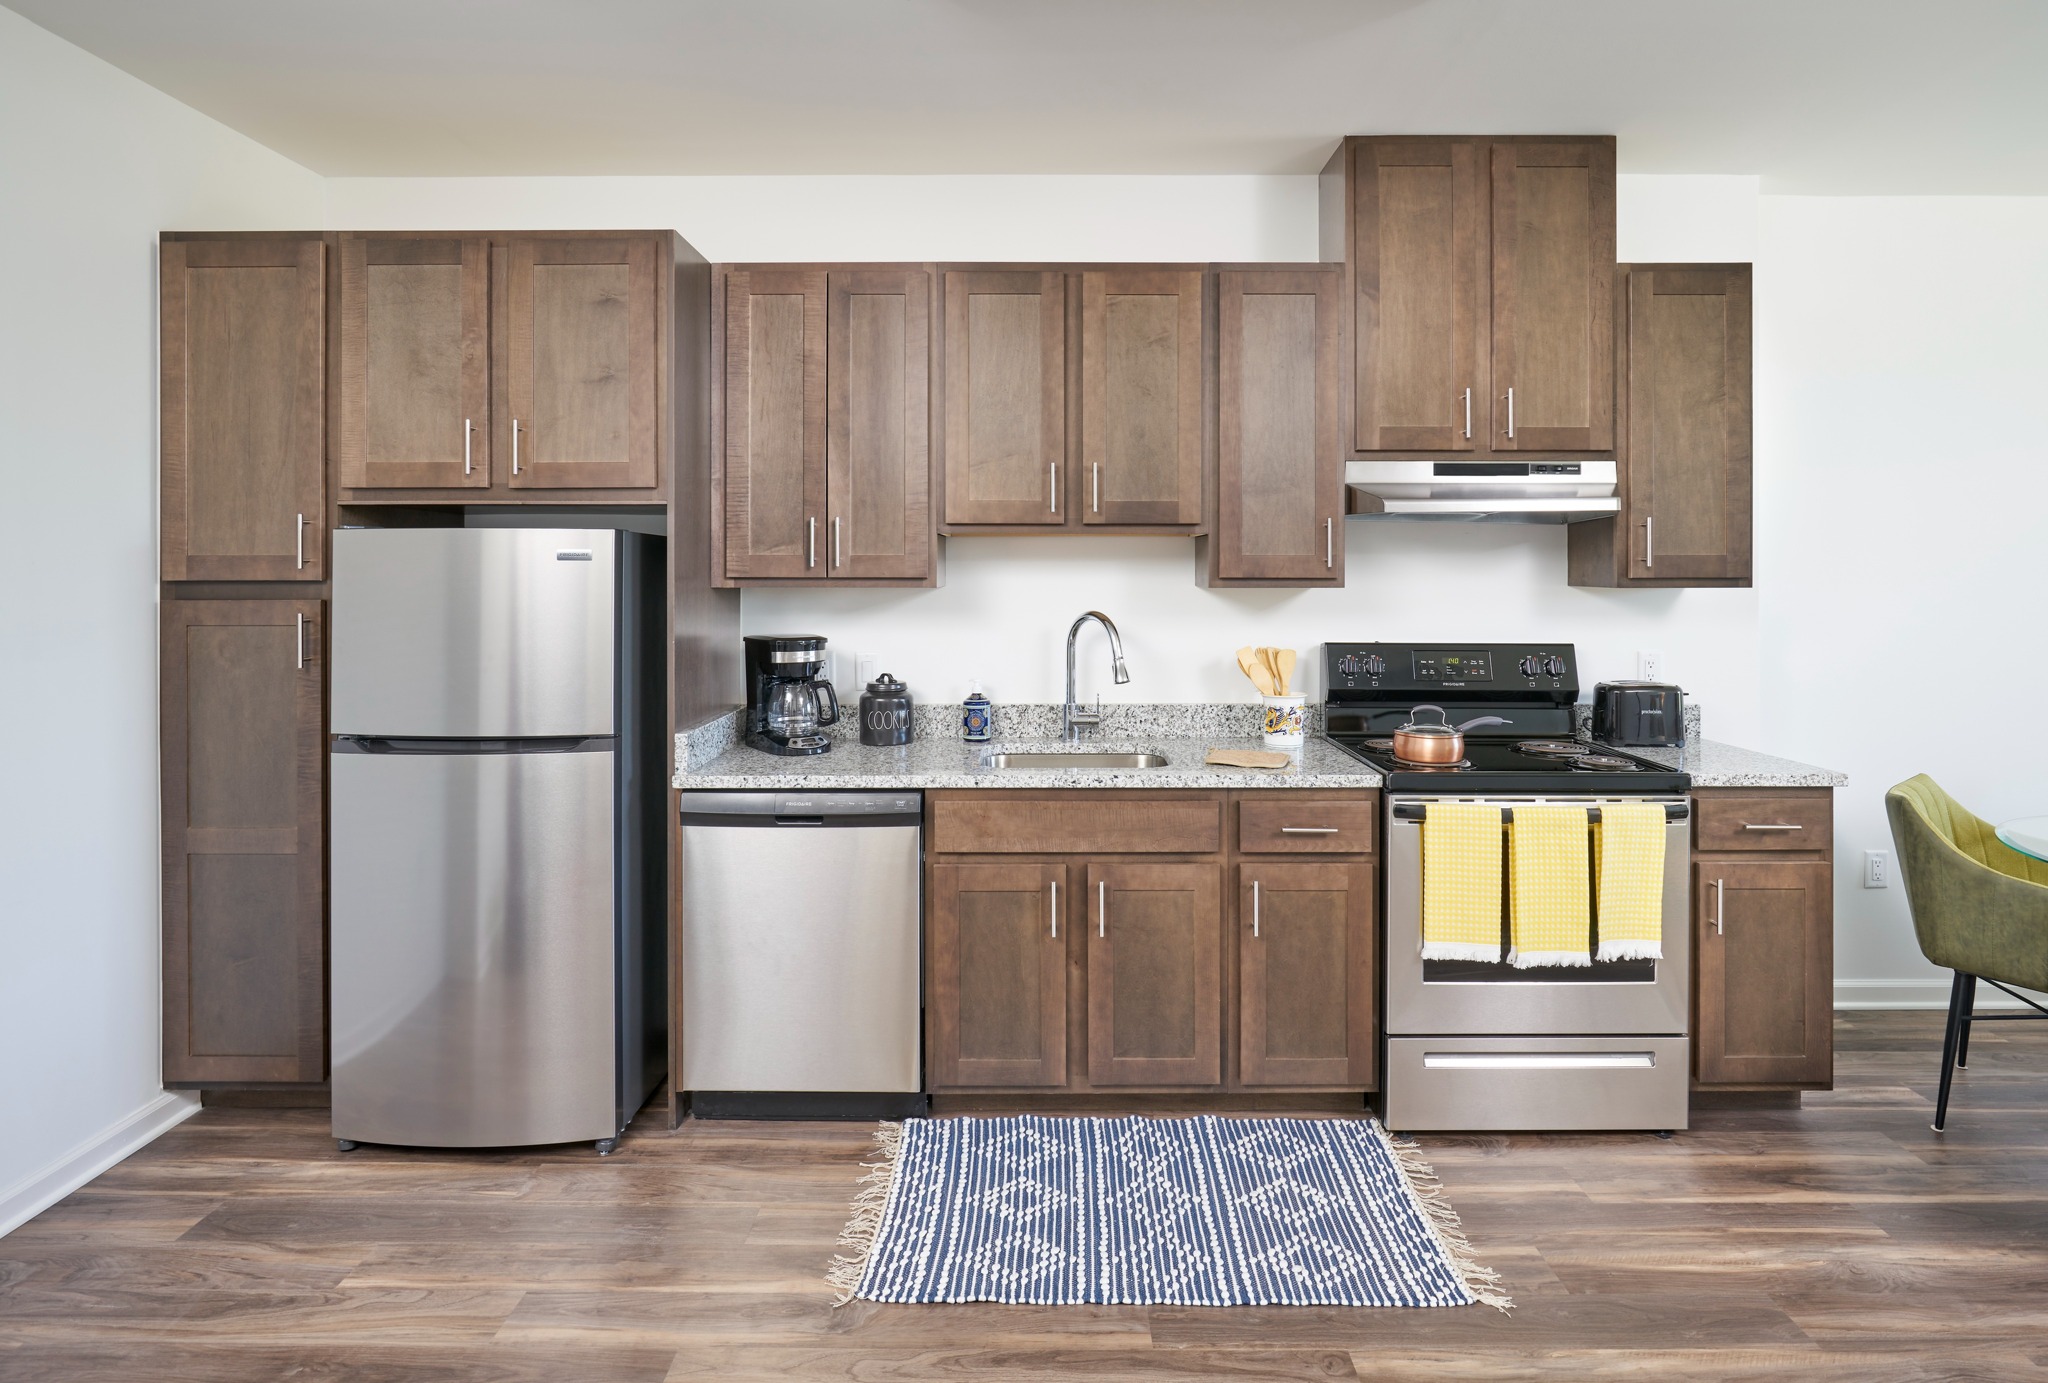 Image of the One Bedroom Model Kitchen | Ovation at Arrowbrook | Affordable Herndon Apartments